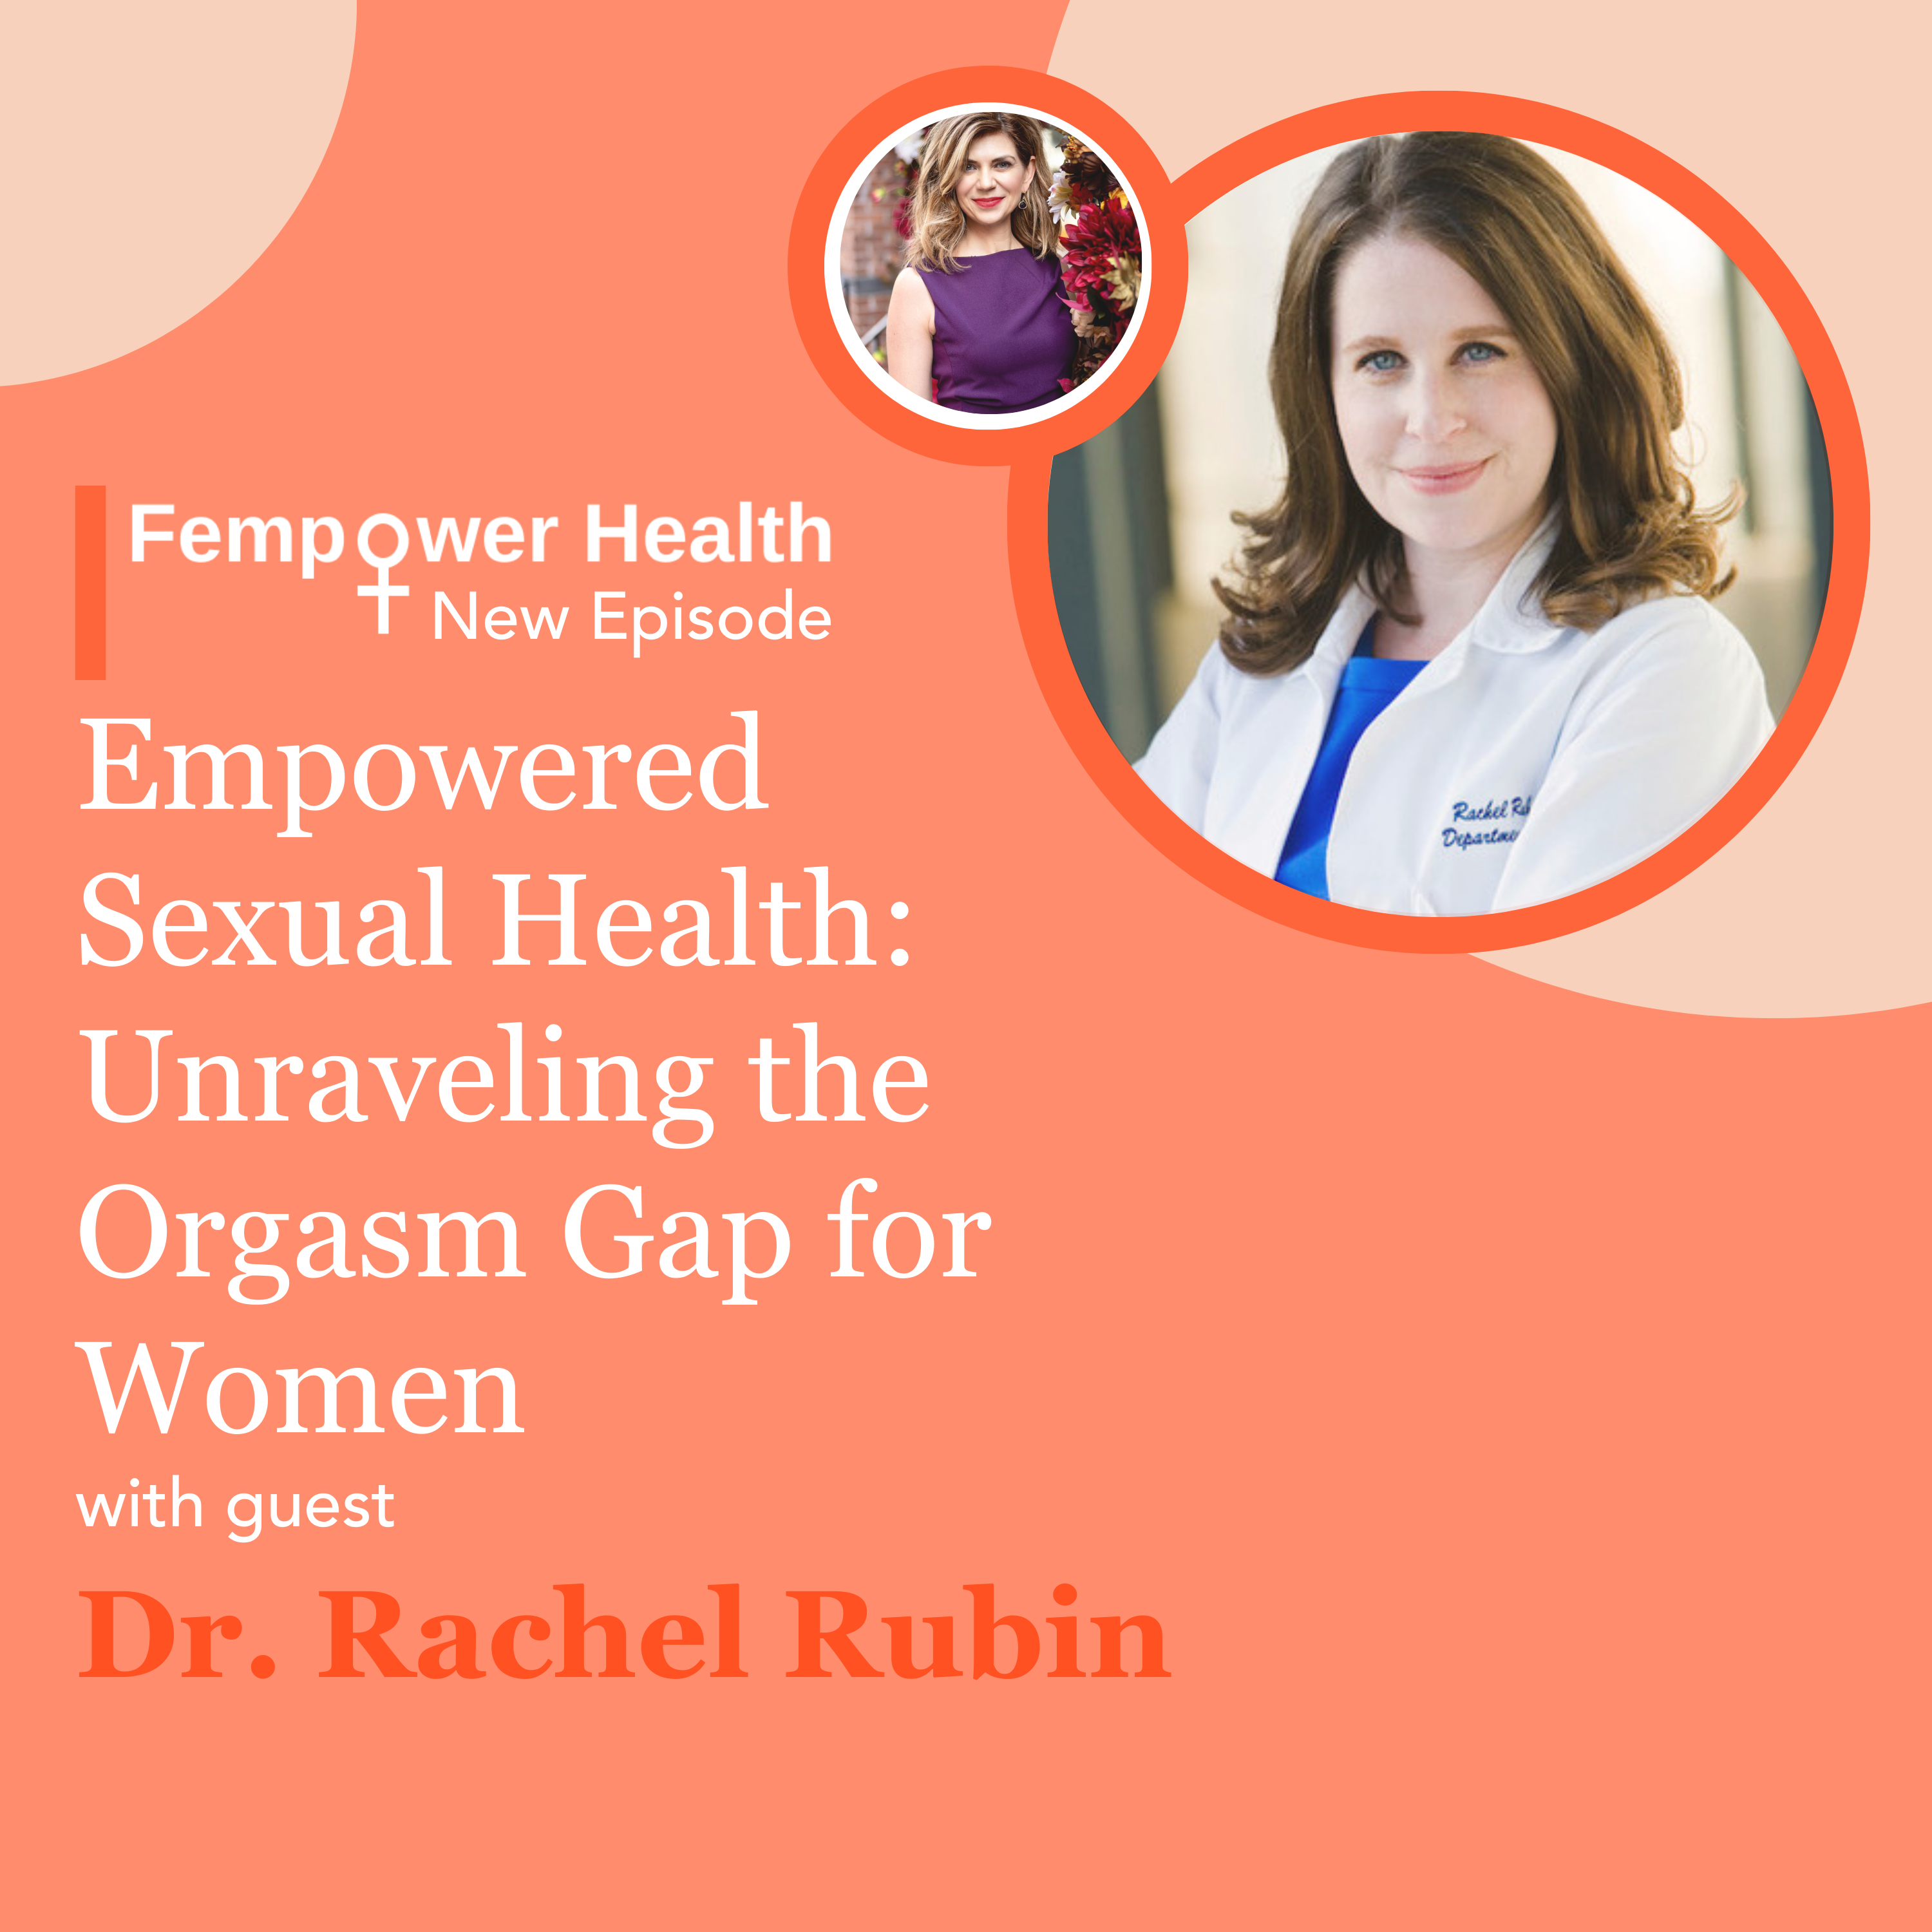 LISTEN AGAIN: Empowered Sexual Health: Unraveling the Orgasm Gap for Women